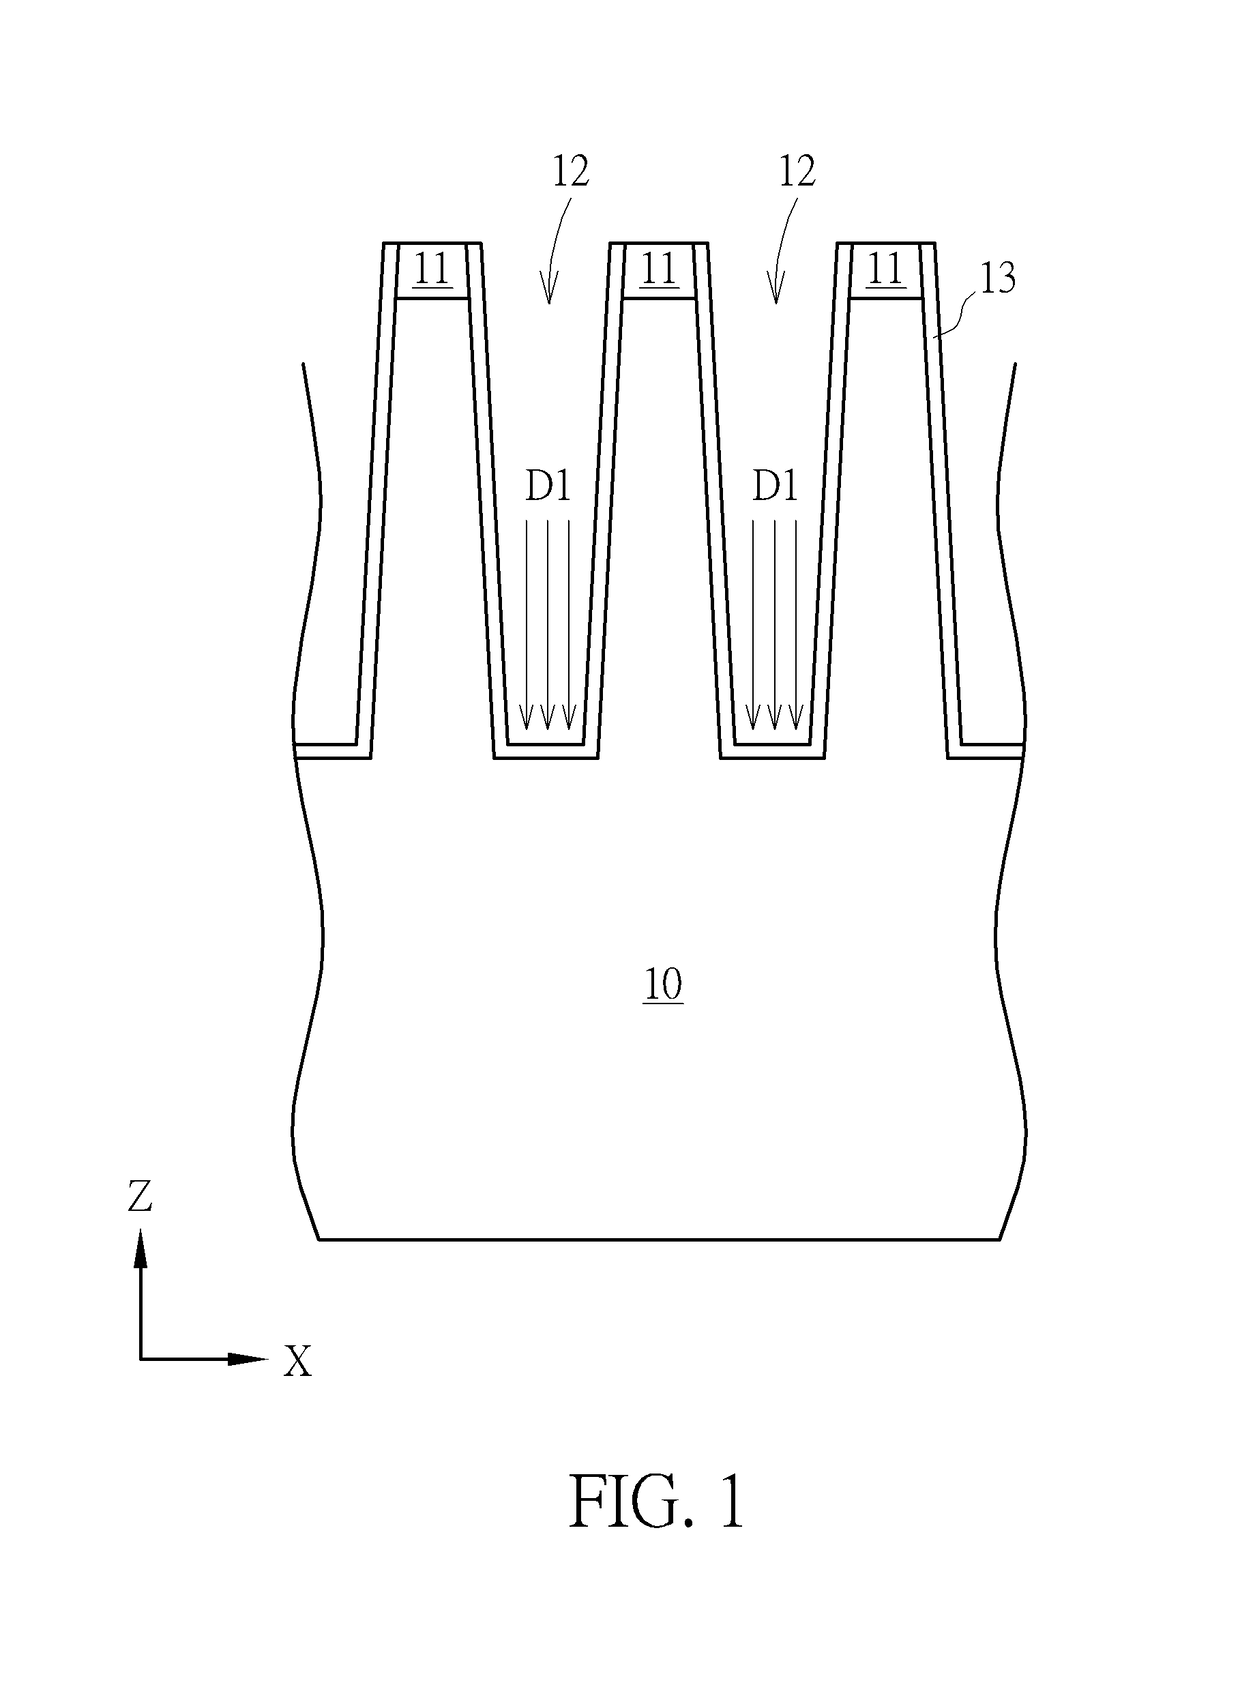 Silicon buried digit line access device and method of forming the same